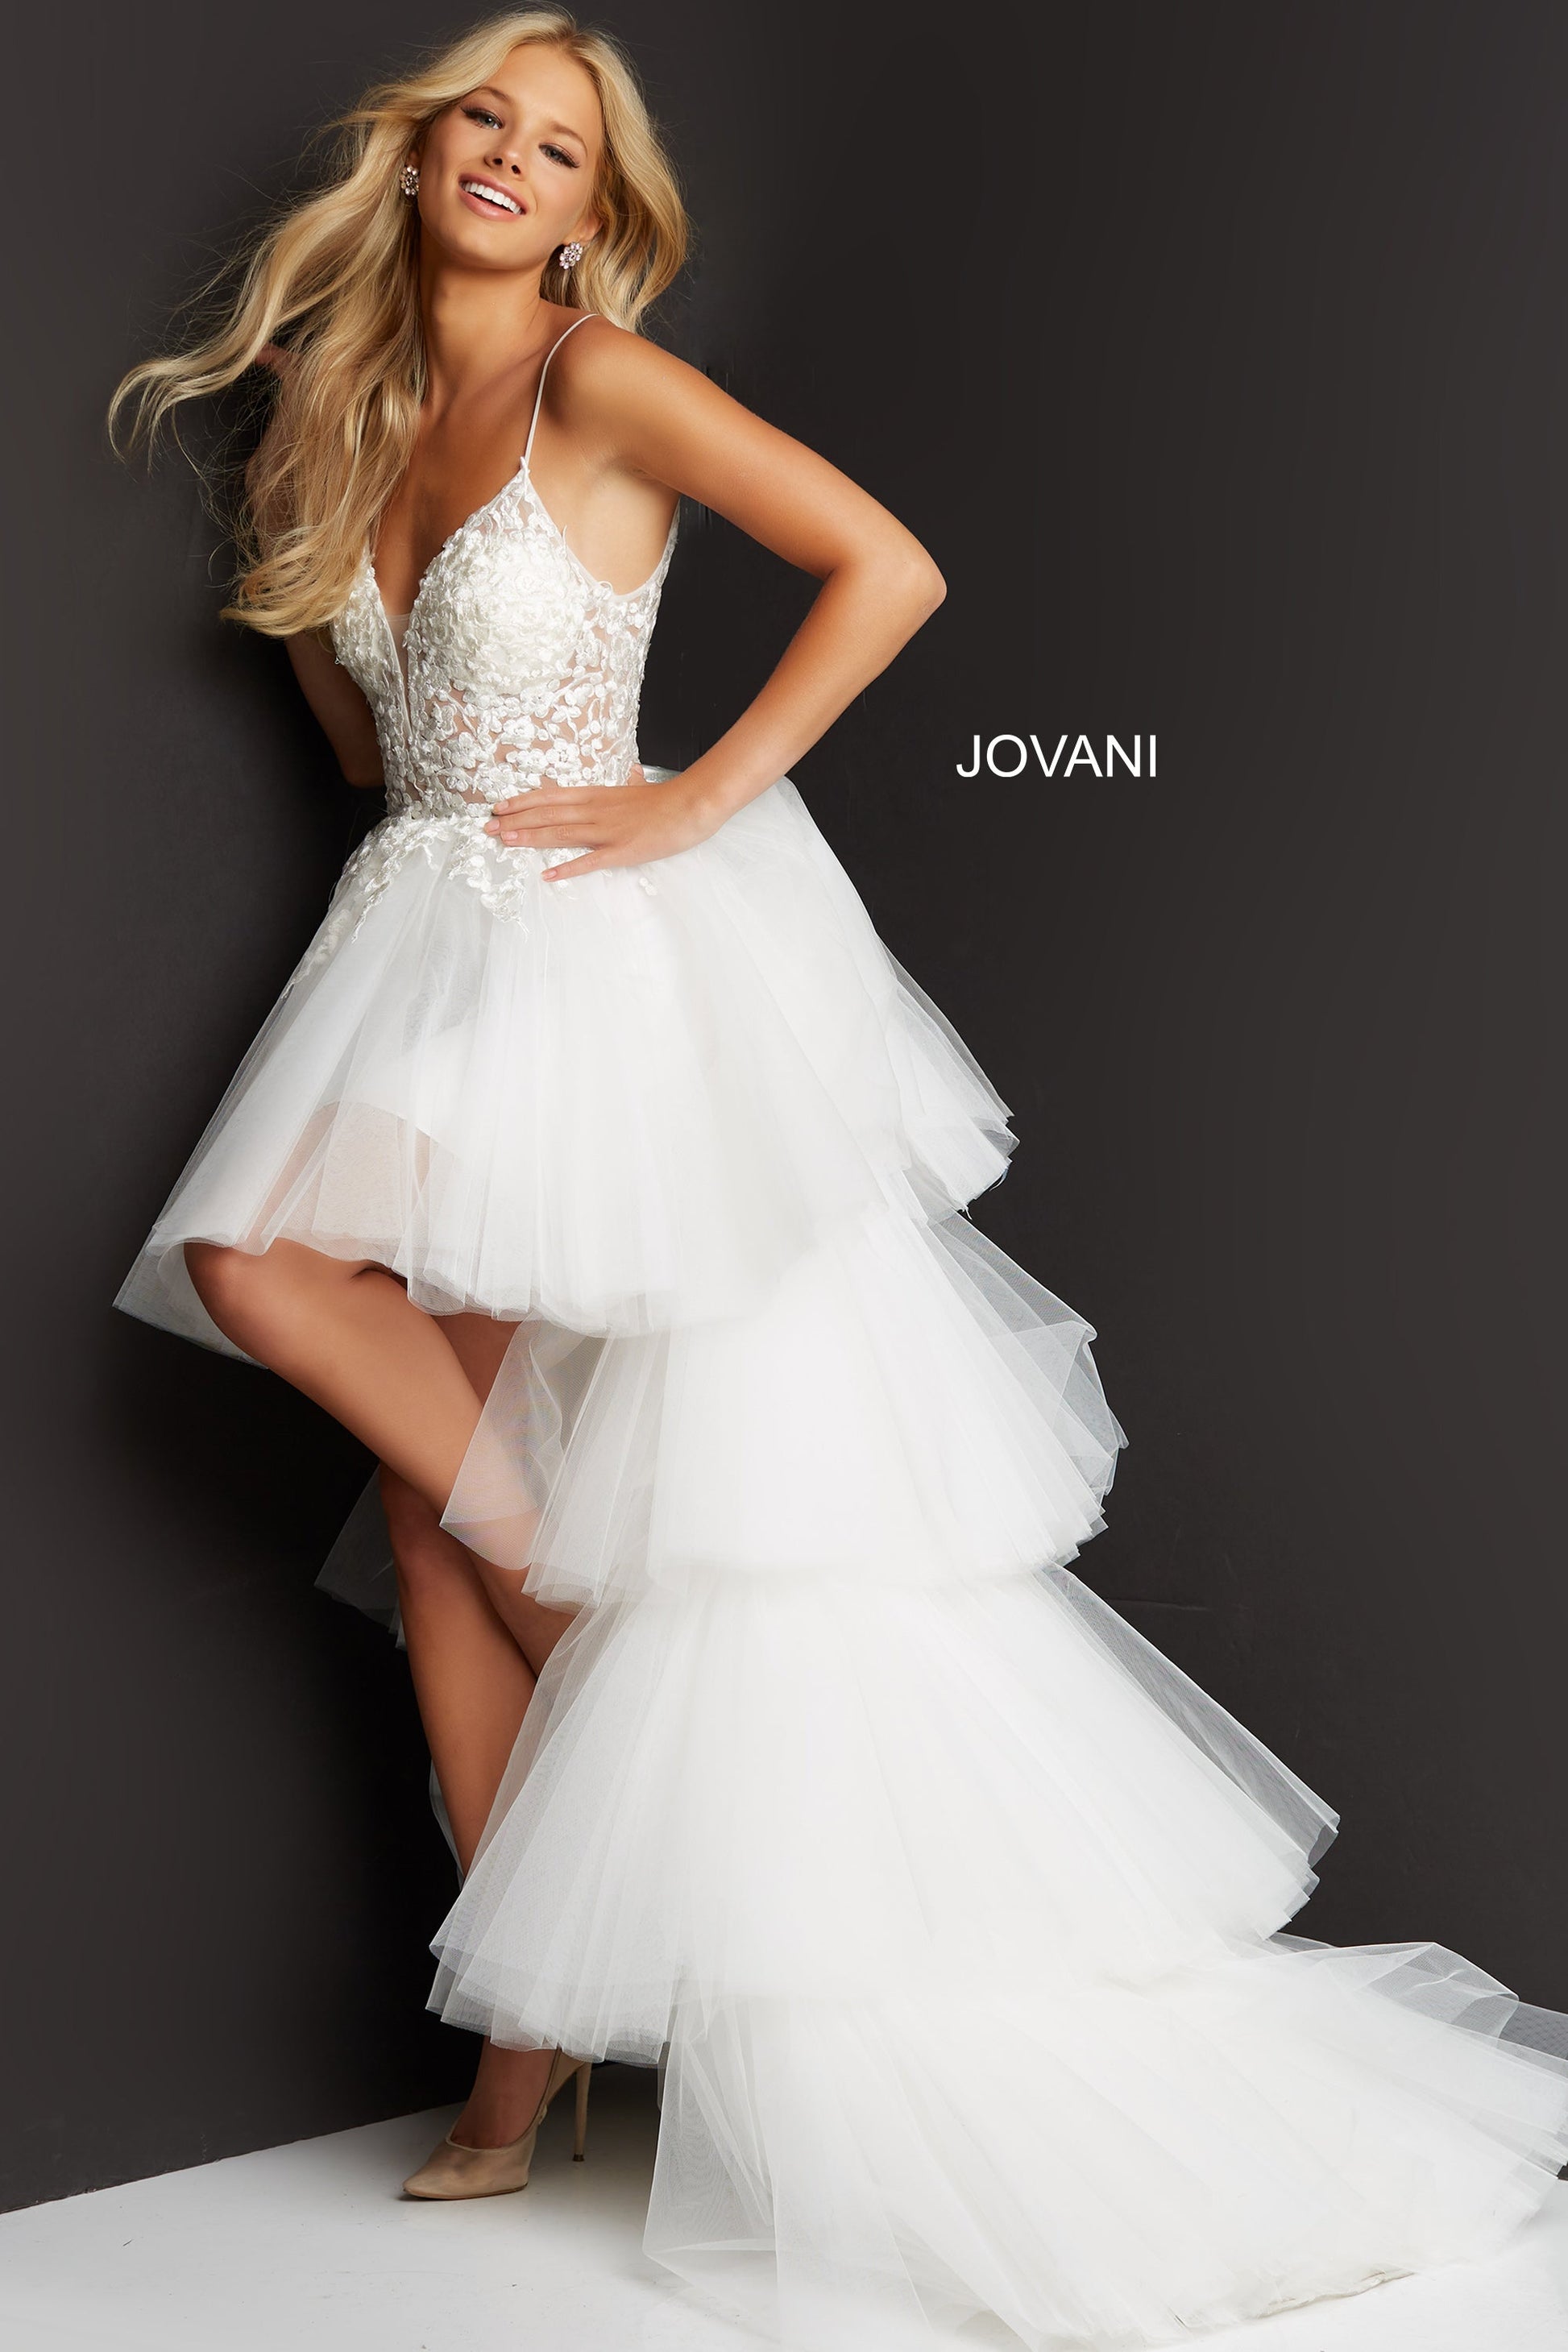 Jovani 07263High Low Prom Dress Pageant Gown.  This Jovani 07263  formal gown features a floral embroidered sheer bodice with a mesh insert plunging neckline, spaghetti straps and pleated layers of long train. 